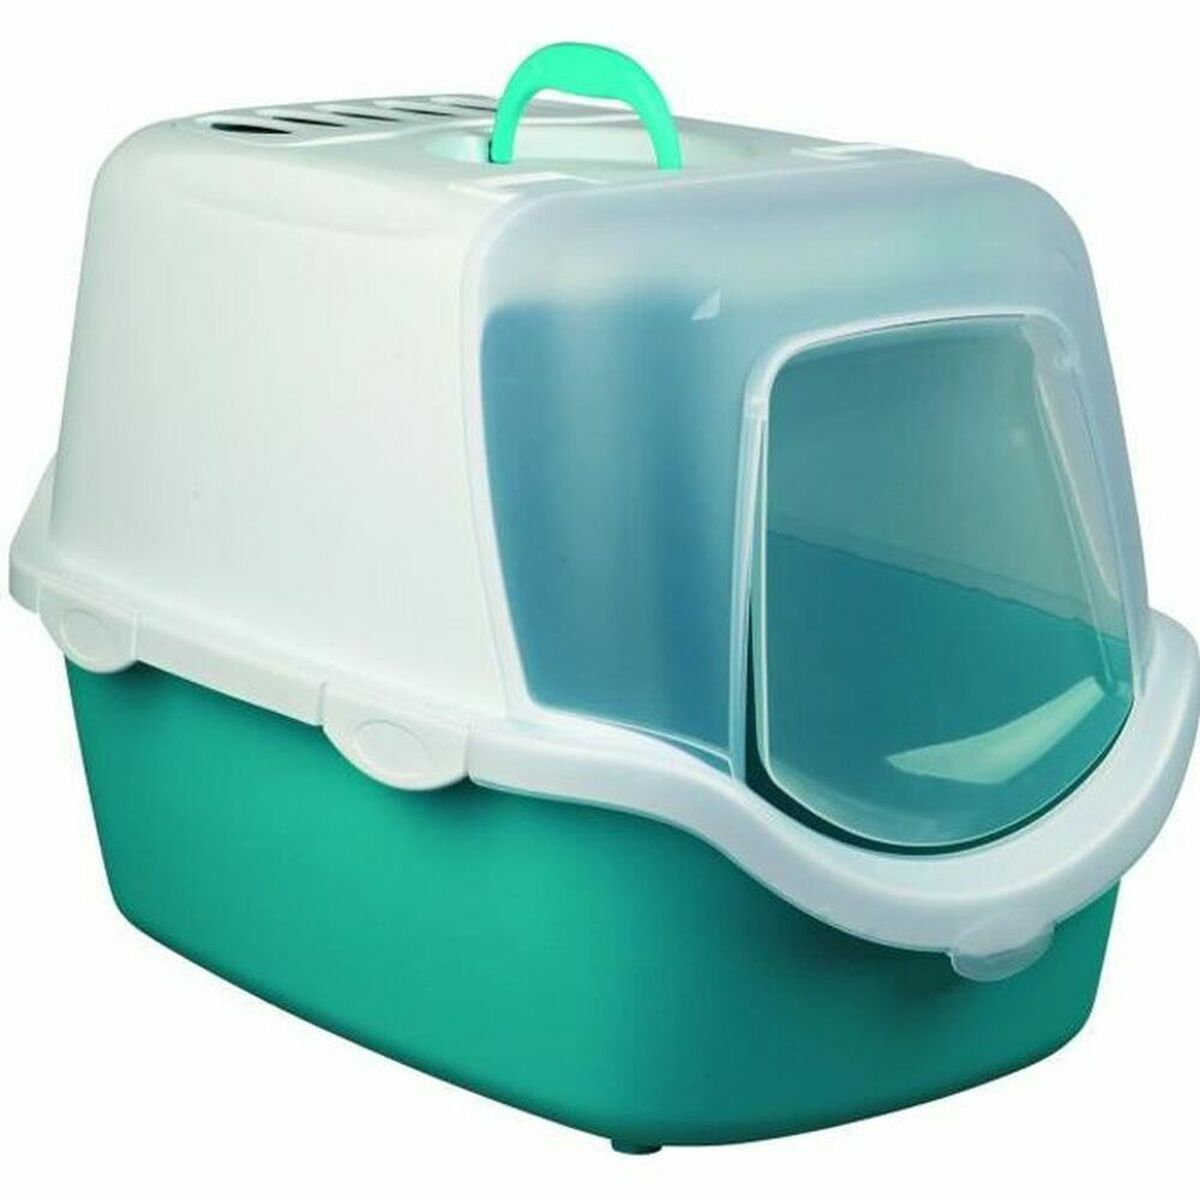 Cat Litter Box Trixie Vico Easy Clean Turquoise White 40 x 40 x 56 cm